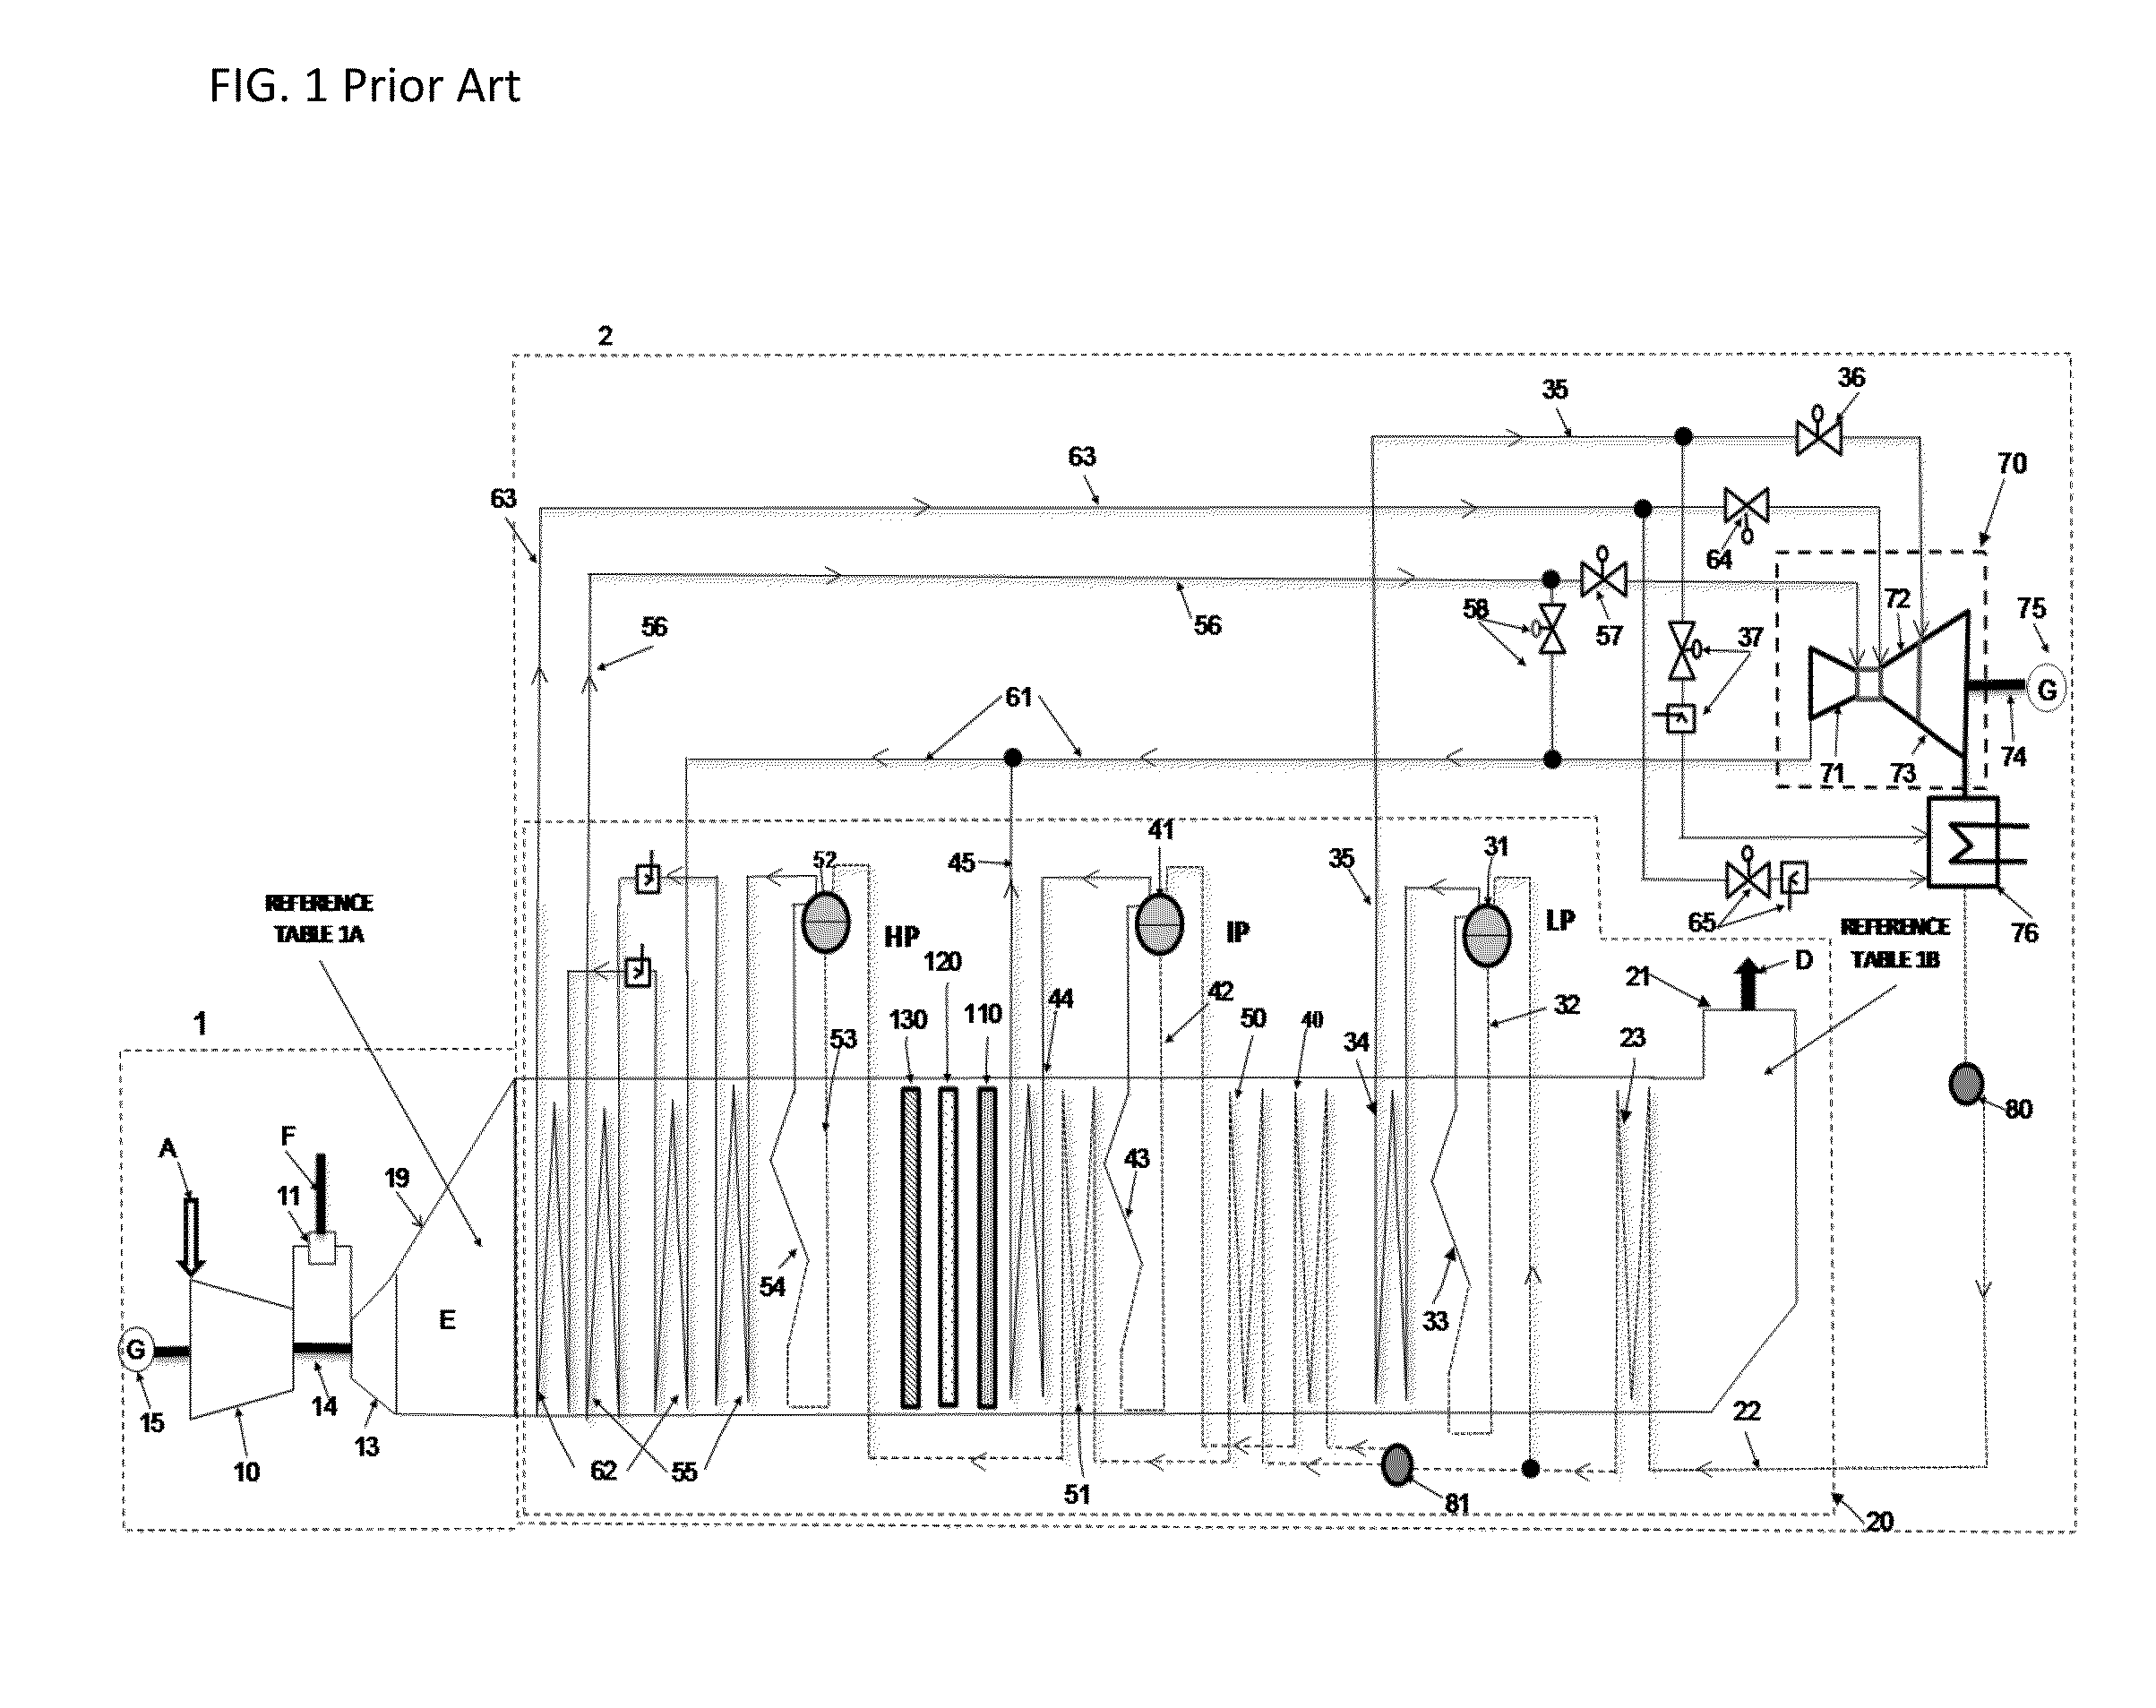 Method and apparatus for operating a gas turbine power plant at low load conditions with stack compliant emissions levels